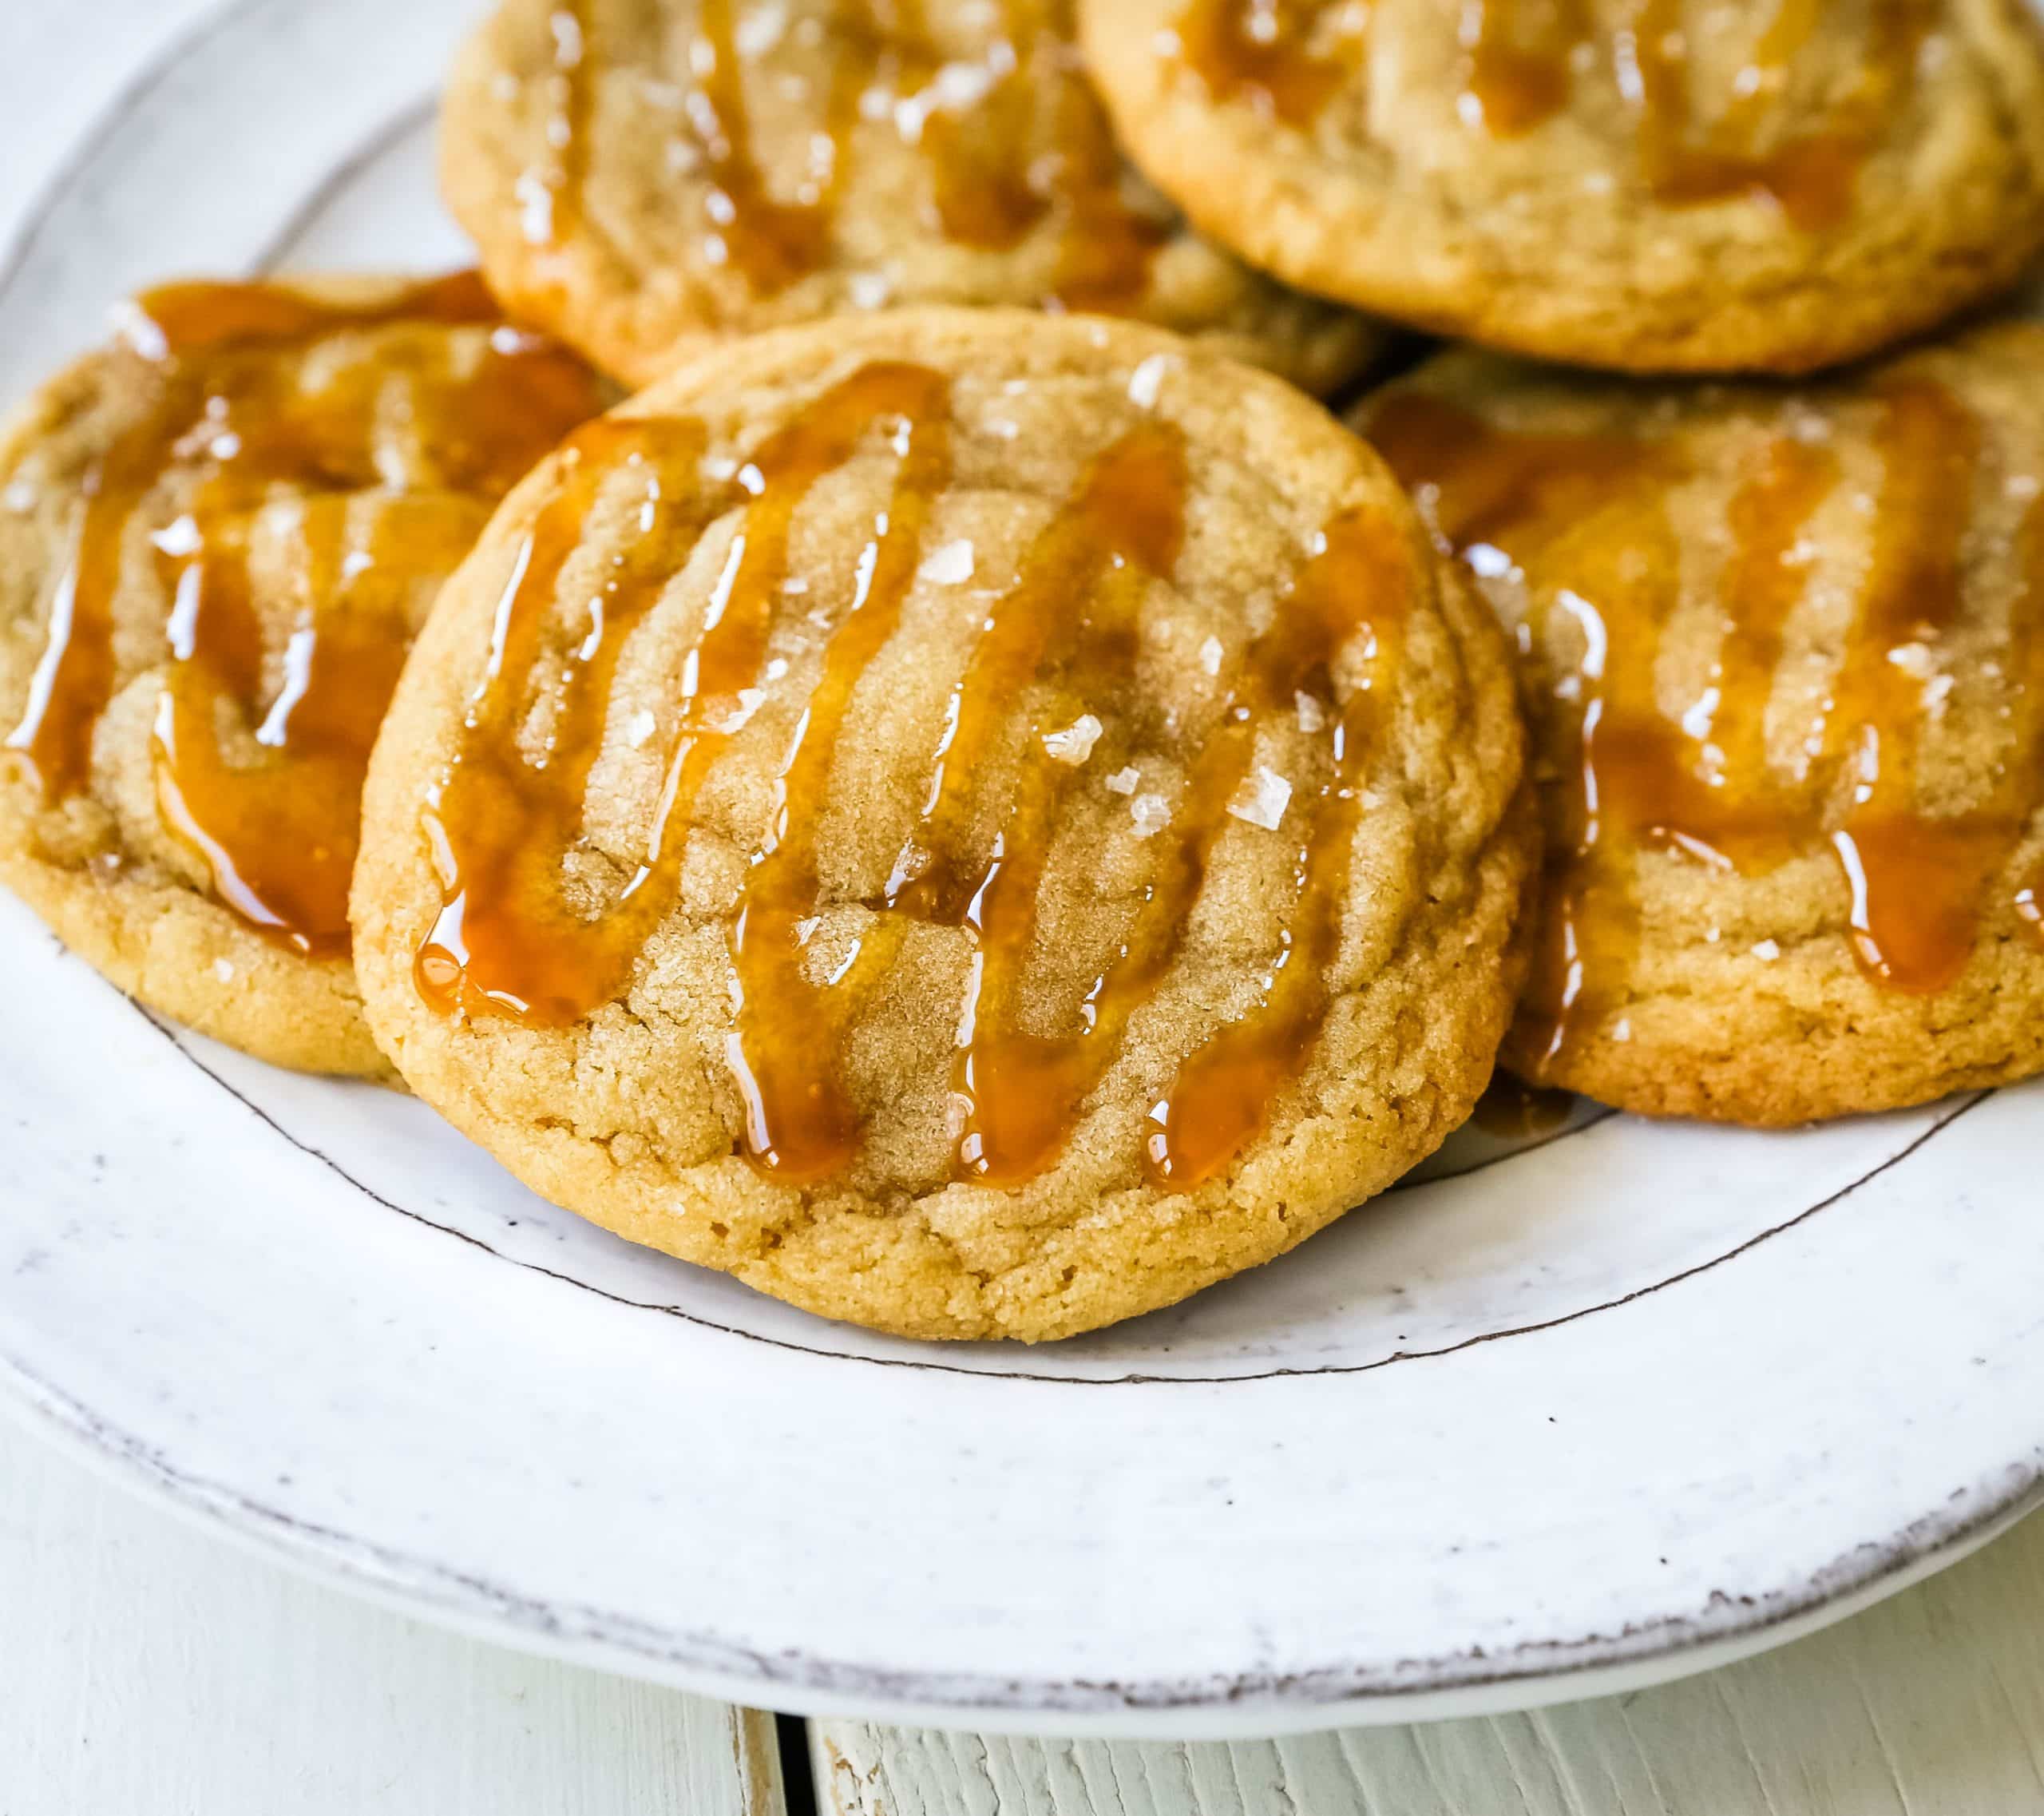 Salted Caramel Cookies Soft chewy caramel cookies with sea salt and drizzled with salted caramel. www.modernhoney.com #cookie #cookies #caramel #caramelcookie #saltedcaramel #seasaltcaramel